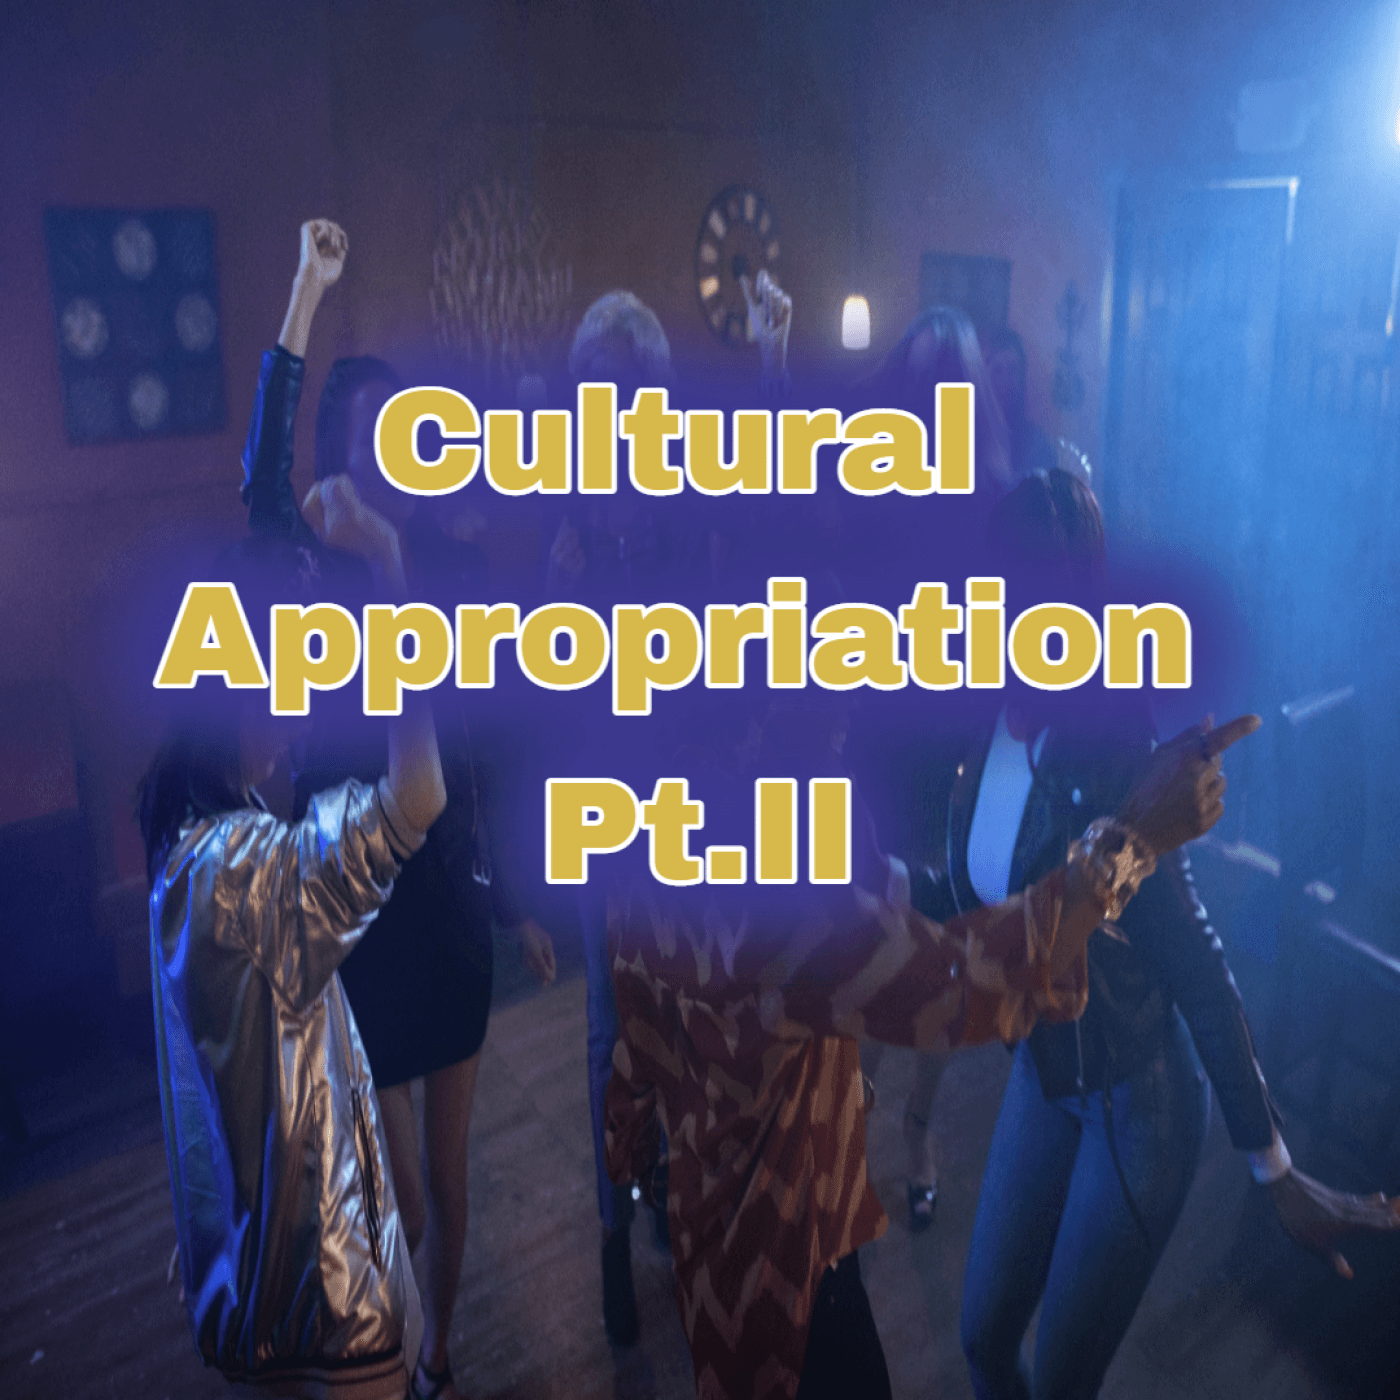 Thumbnail for "Blackness and Cultural Appropriation Pt. II".